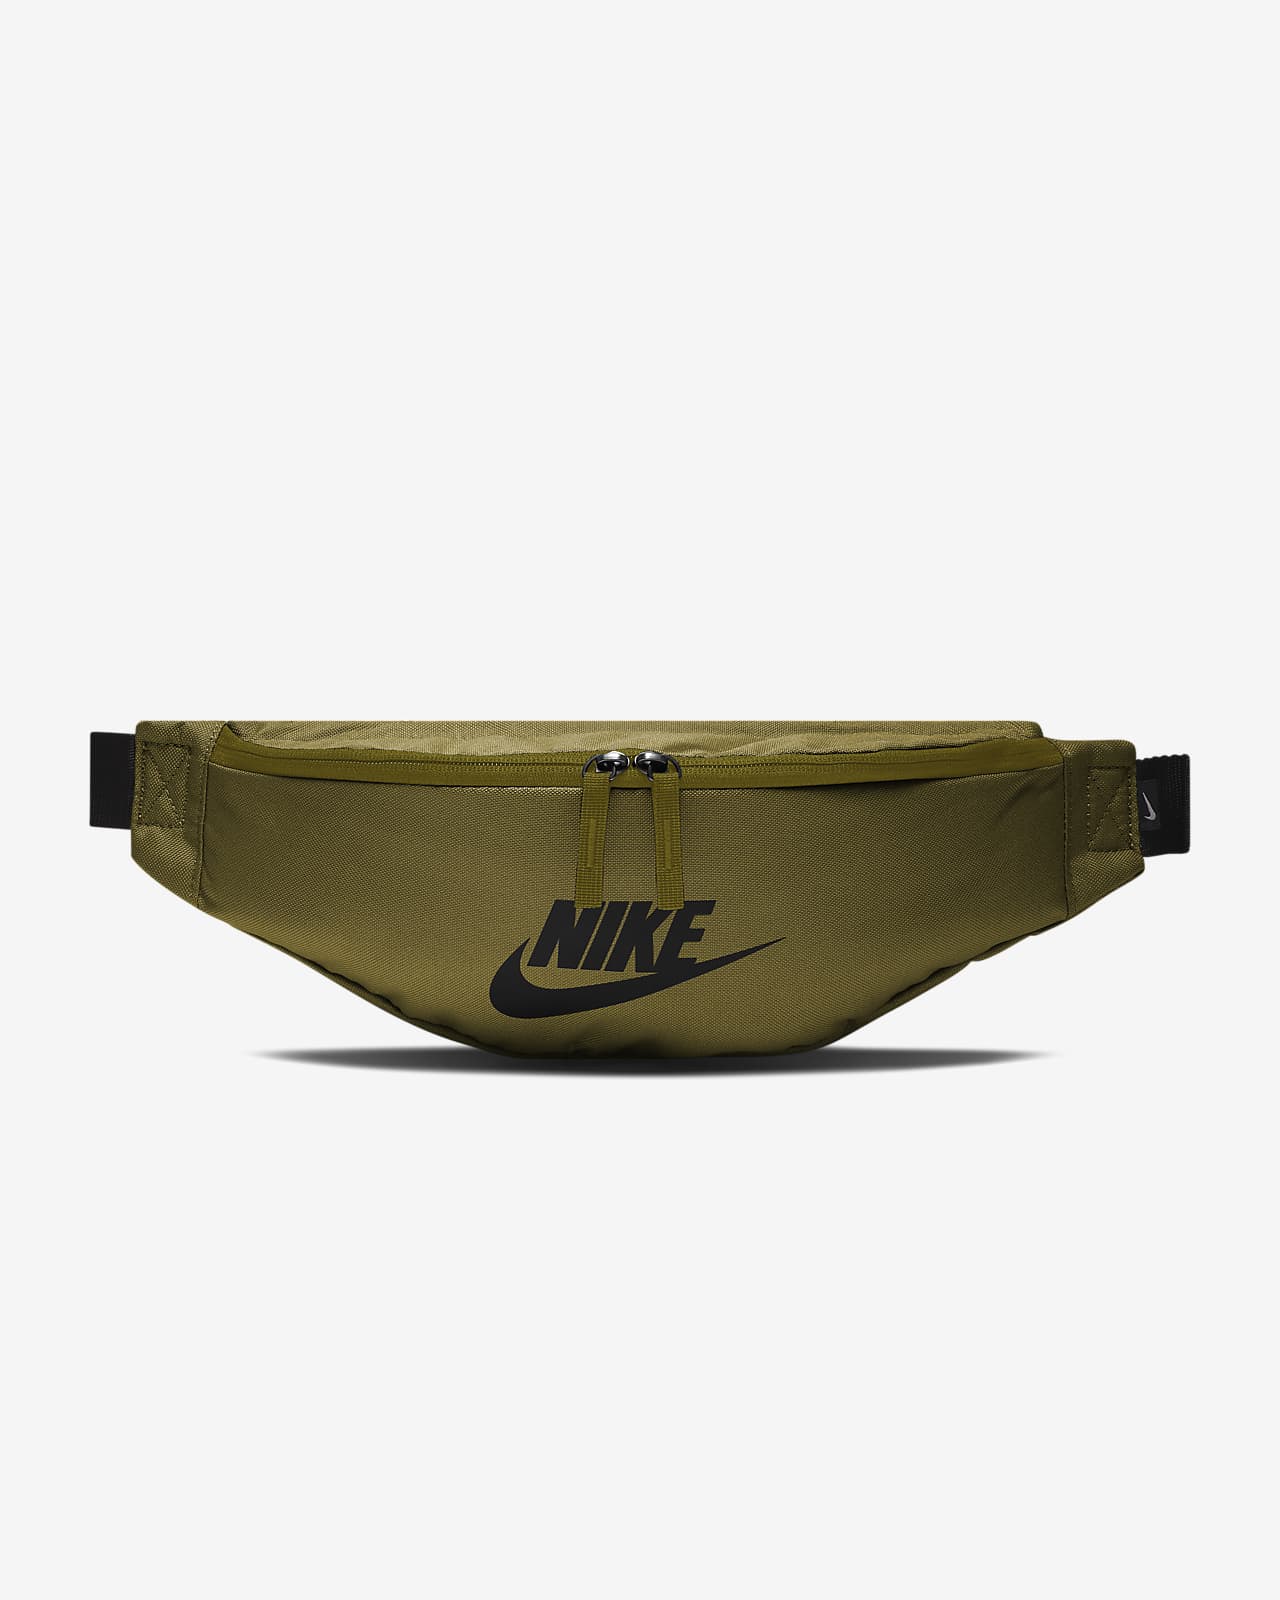 Nike Belt bags, waist bags and fanny packs for Women